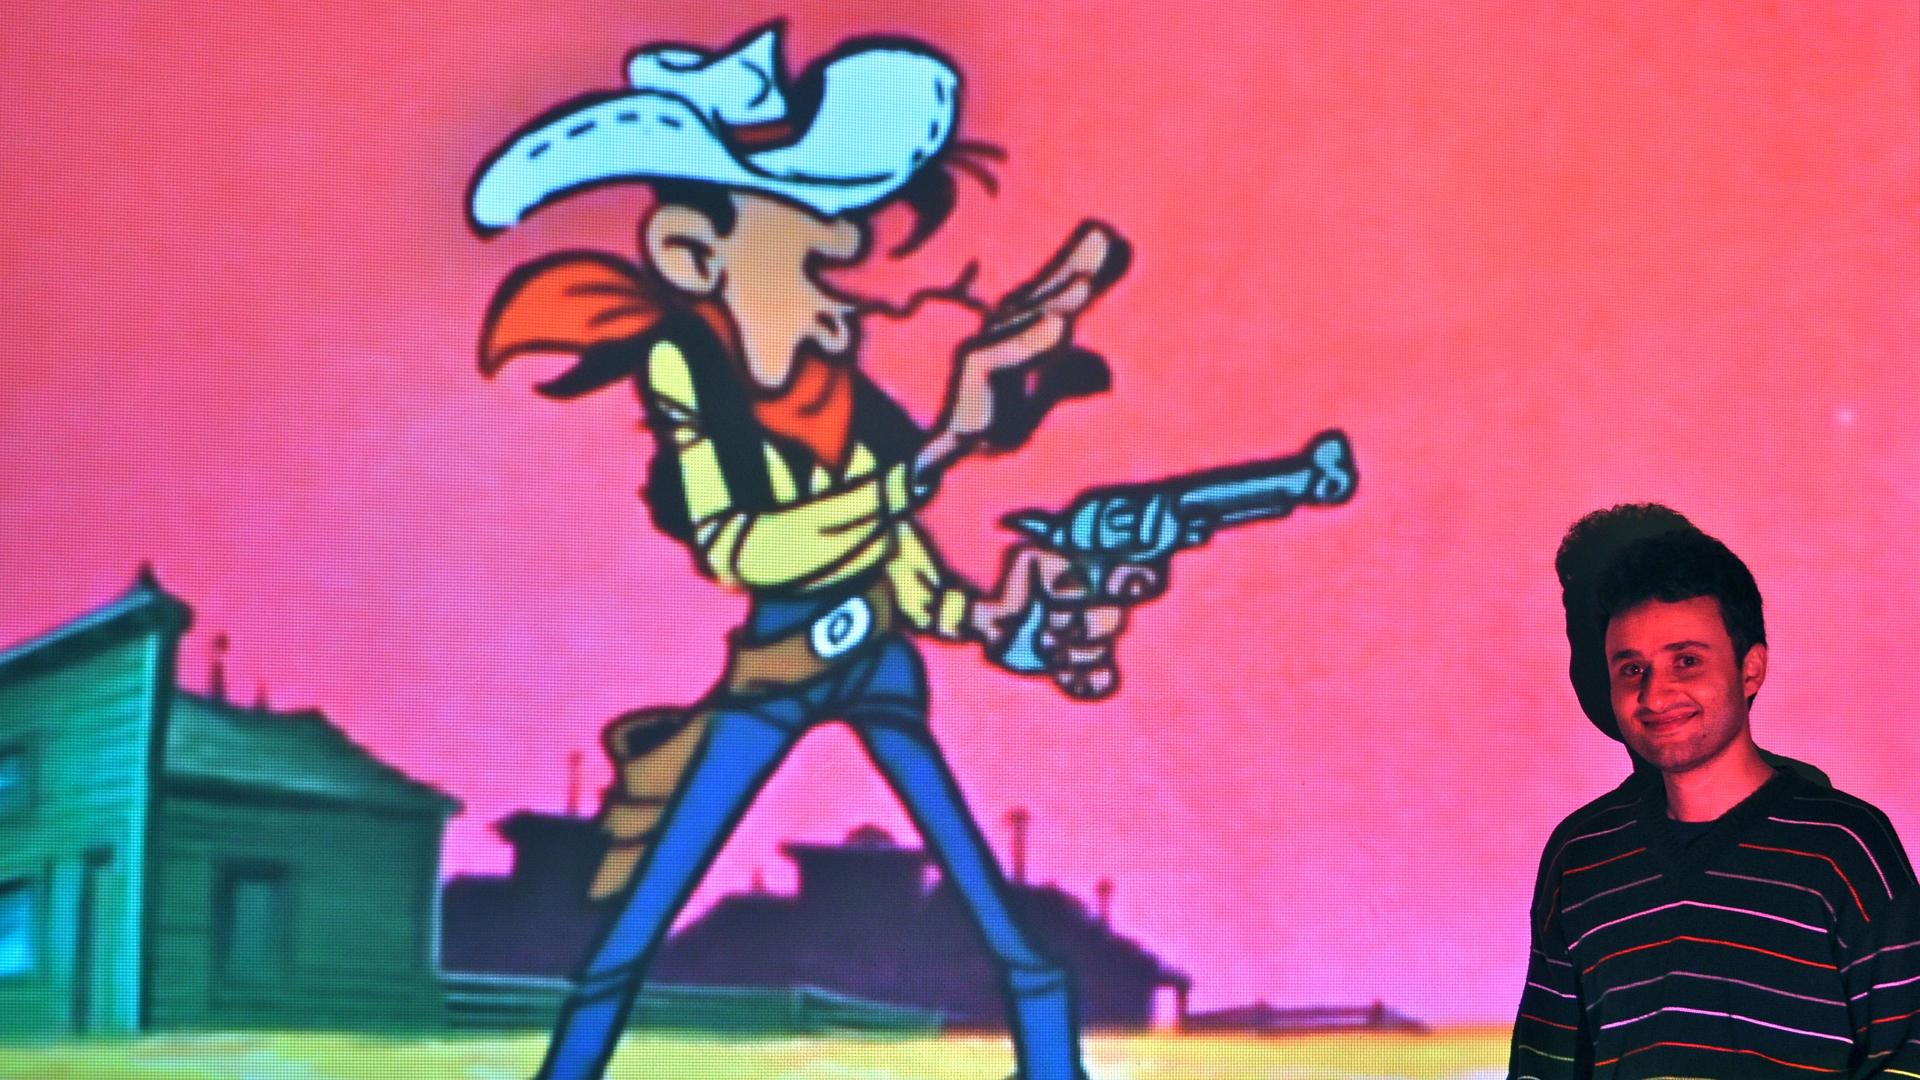 Reza Jamayran poses in front of an image of a childhood hero, Lucky Luke.